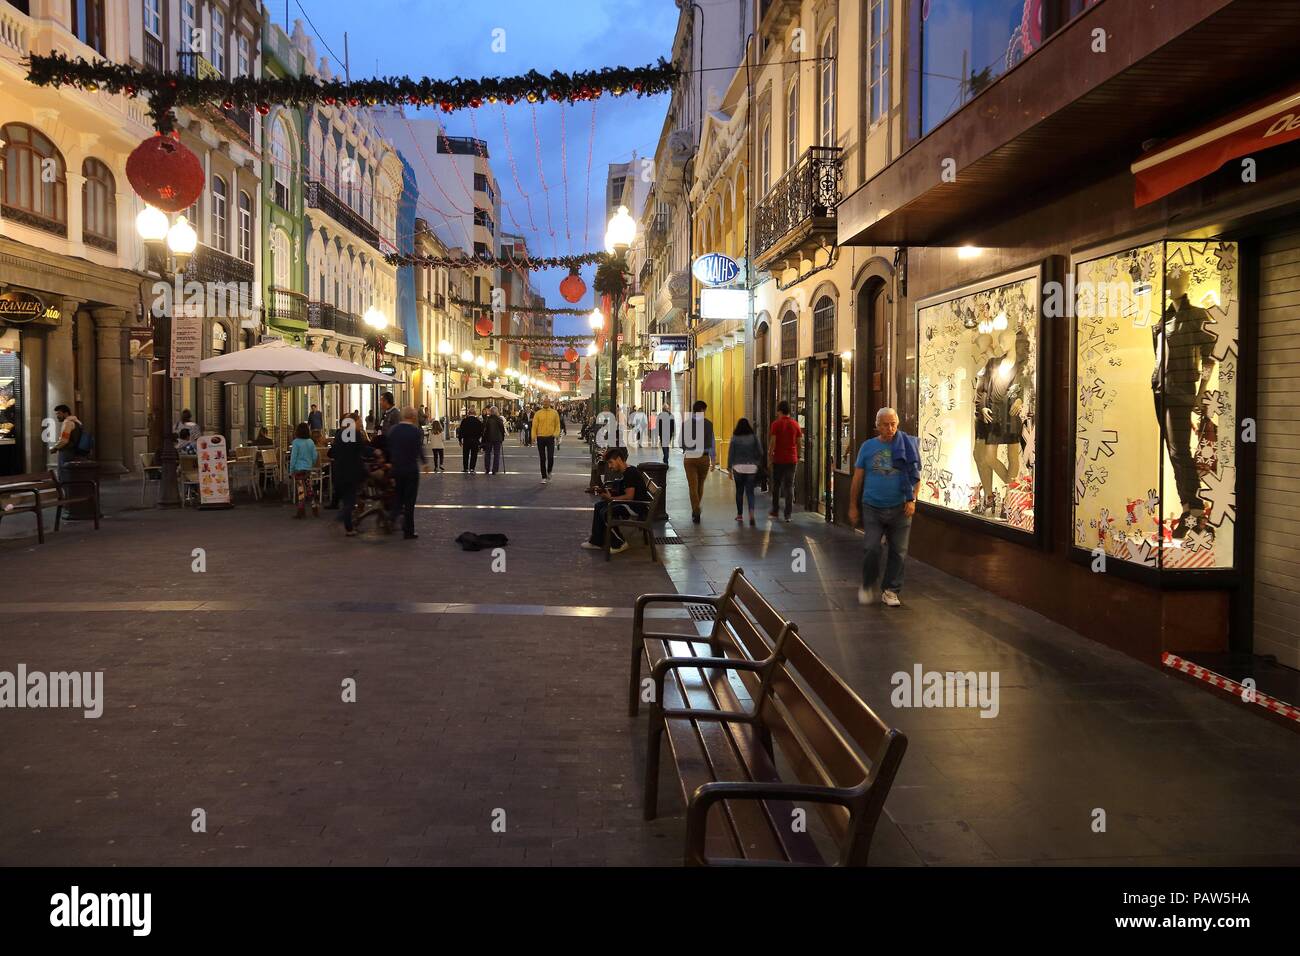 Shopping In Canary Islands High Resolution Stock Photography and Images -  Alamy